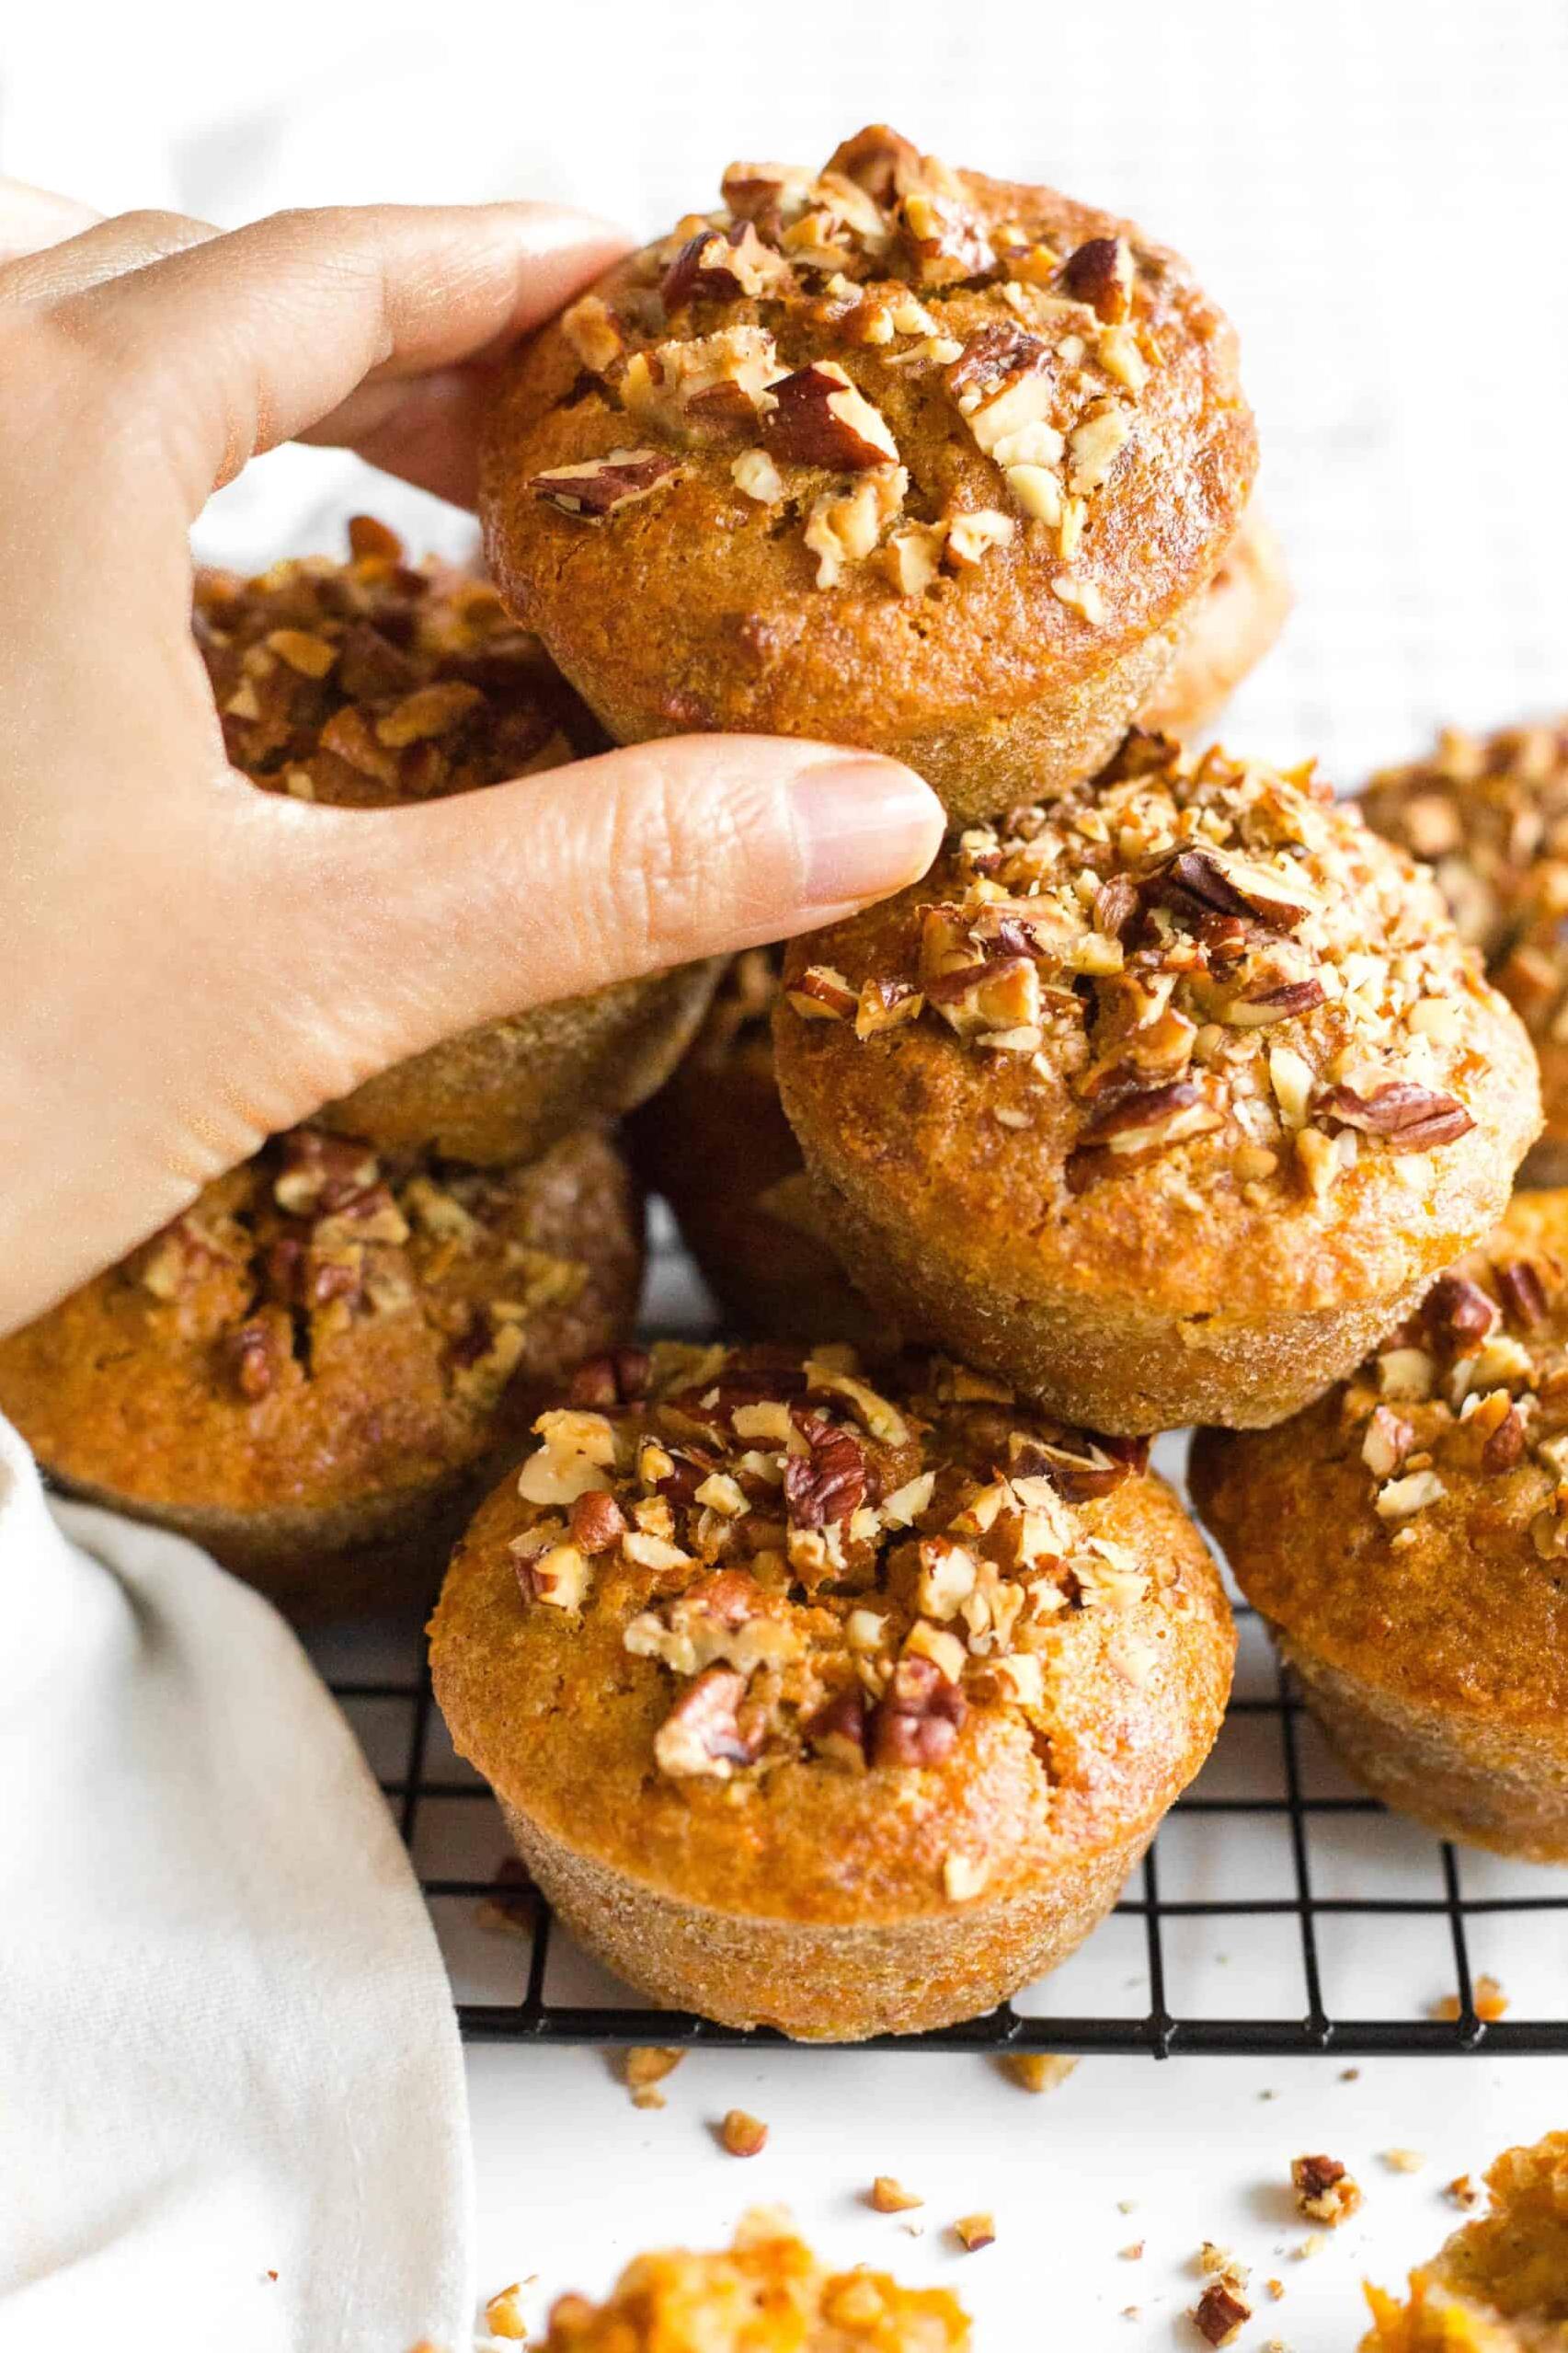  With this recipe, you won't miss gluten, dairy, egg or yeast in your muffin!